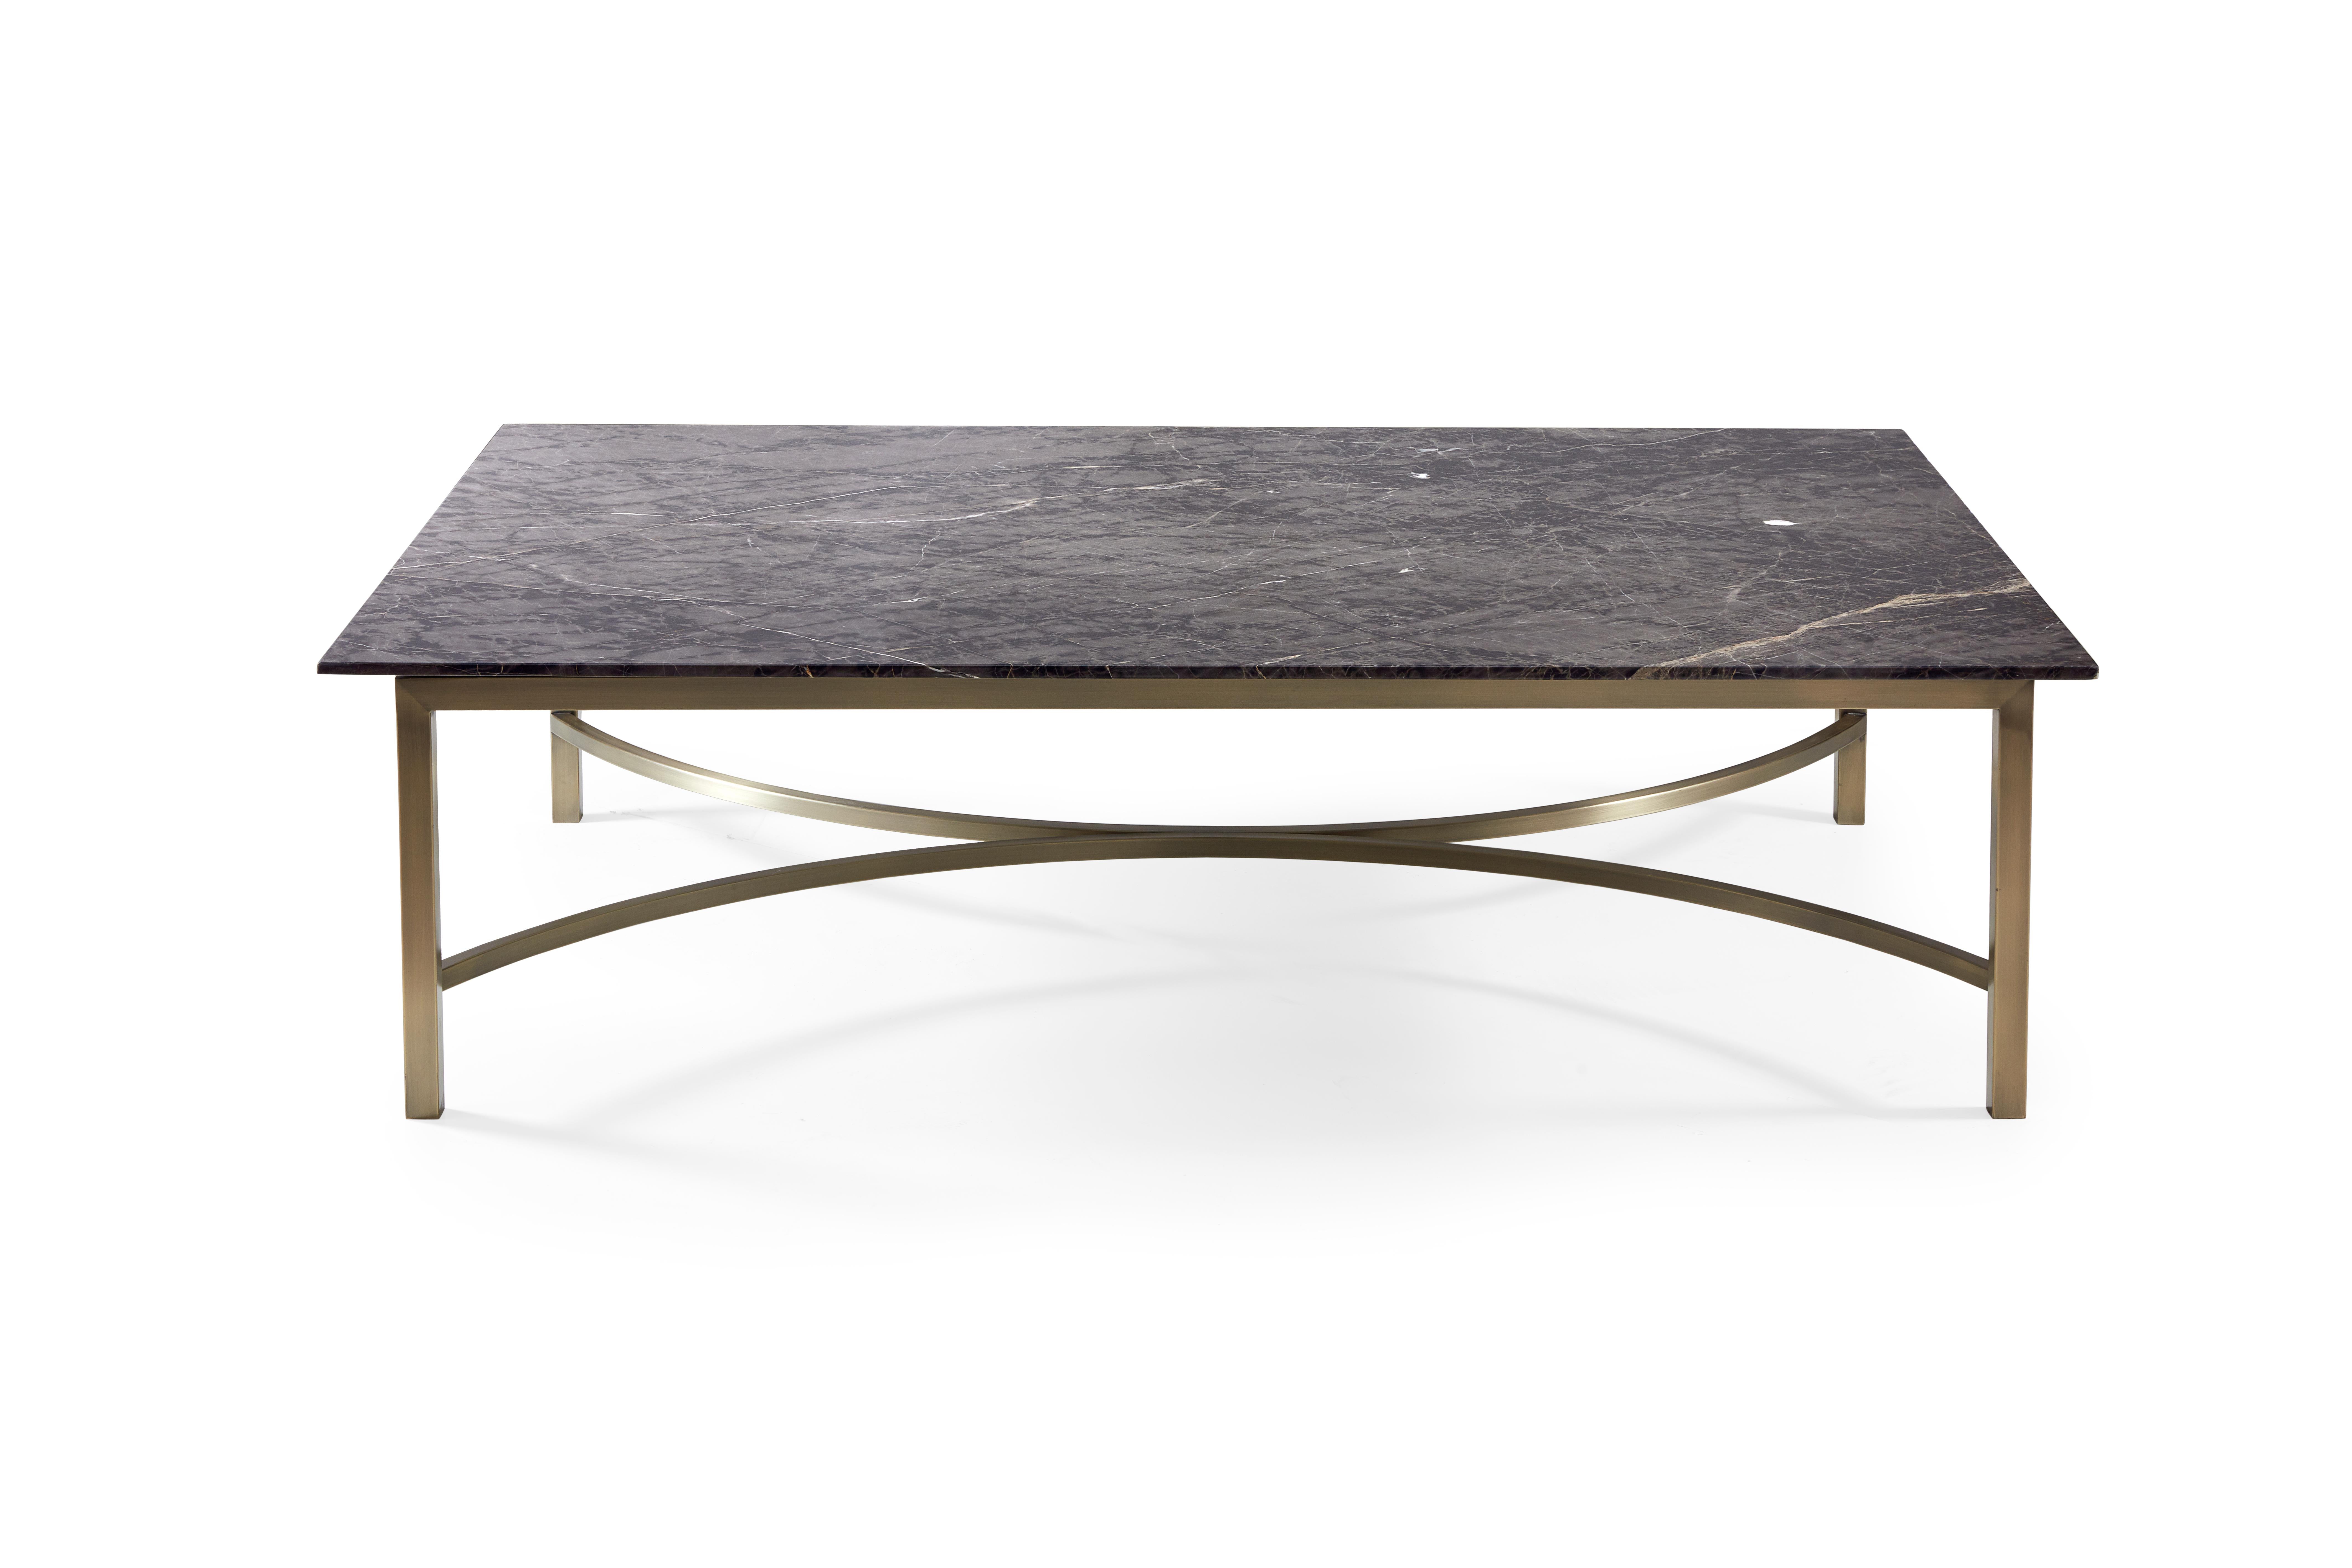 A black and white veined marble top upon bronze base, this coffee table is meant to be a central focus in any living space. Style the top with books and accessories, or leave it bare to admire the natural beauty.